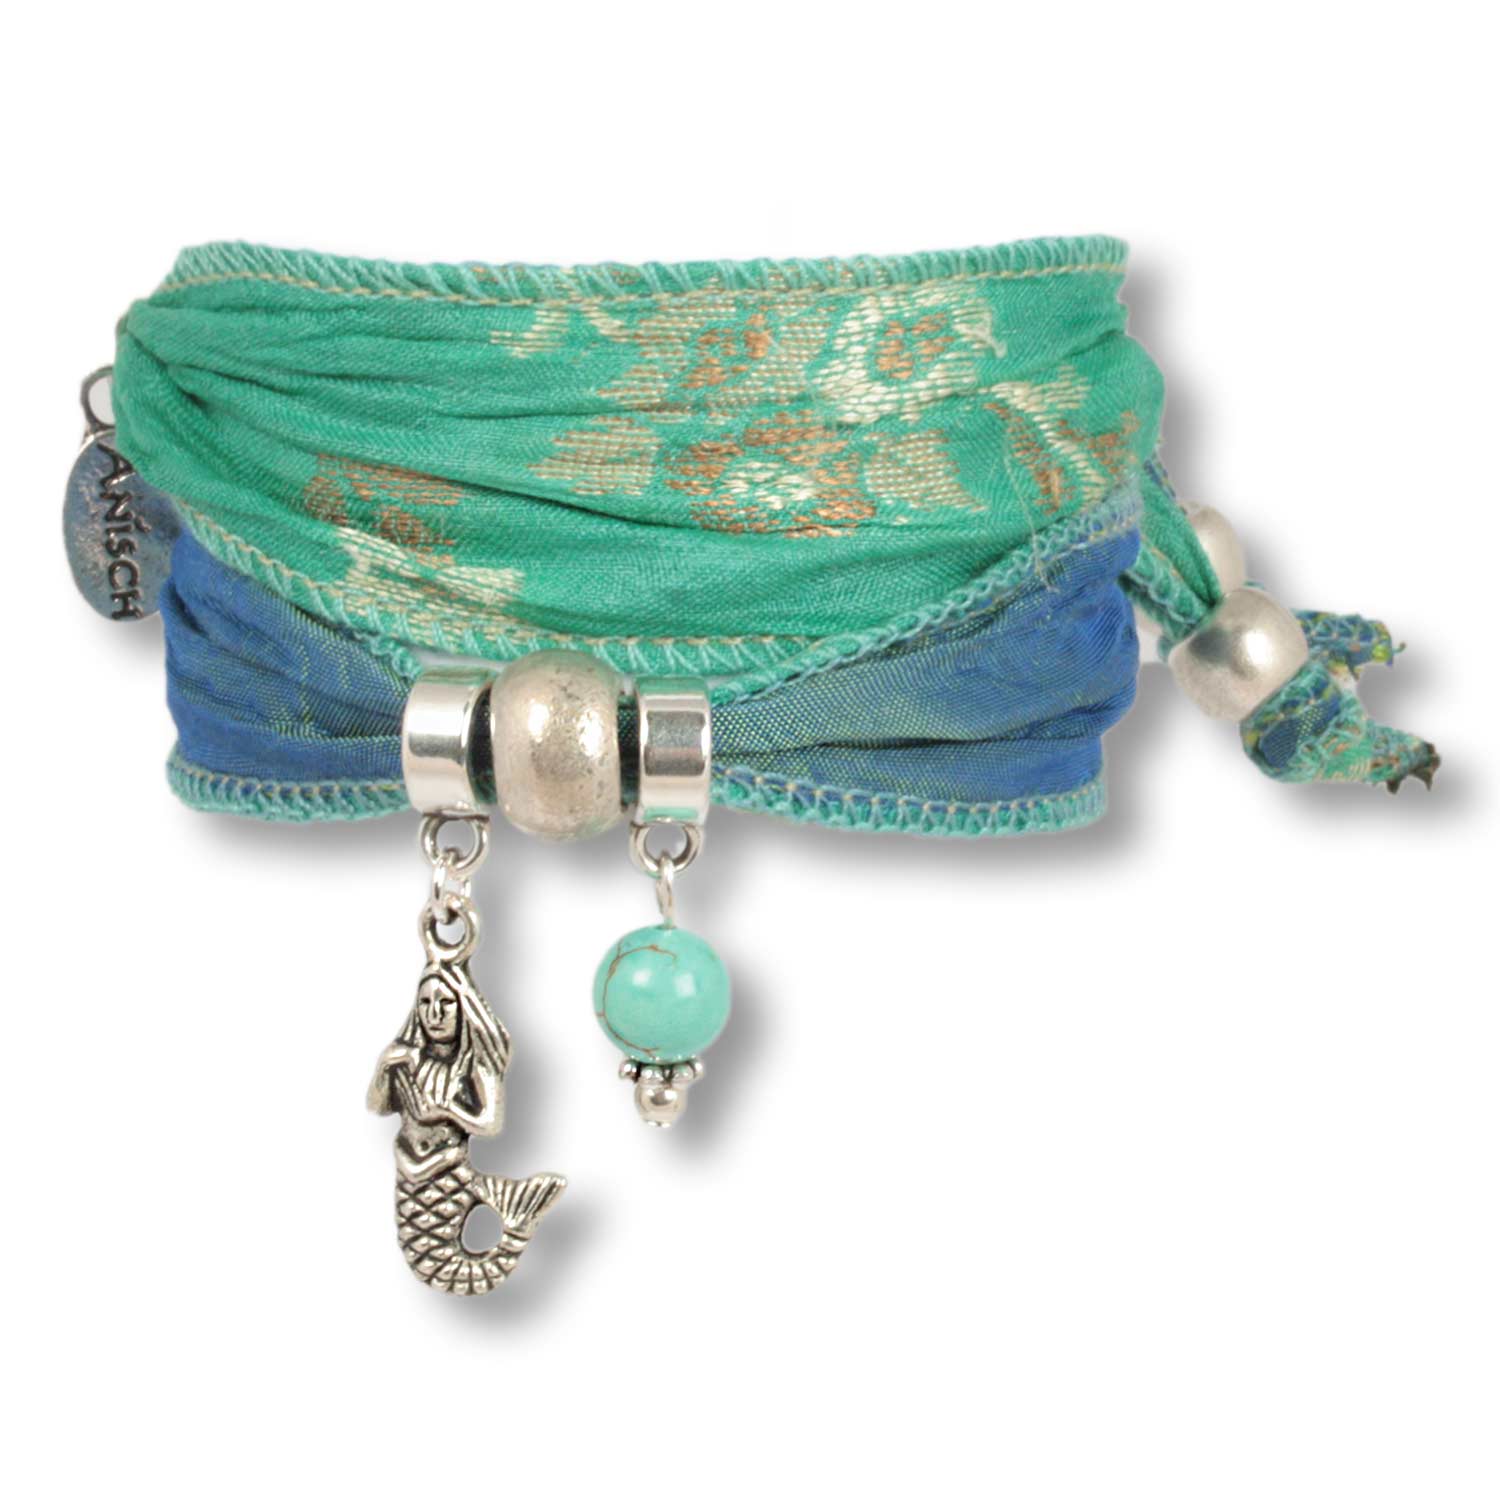 Seagrass - Ocean Daughters luck bracelet from indian saris with turquoise